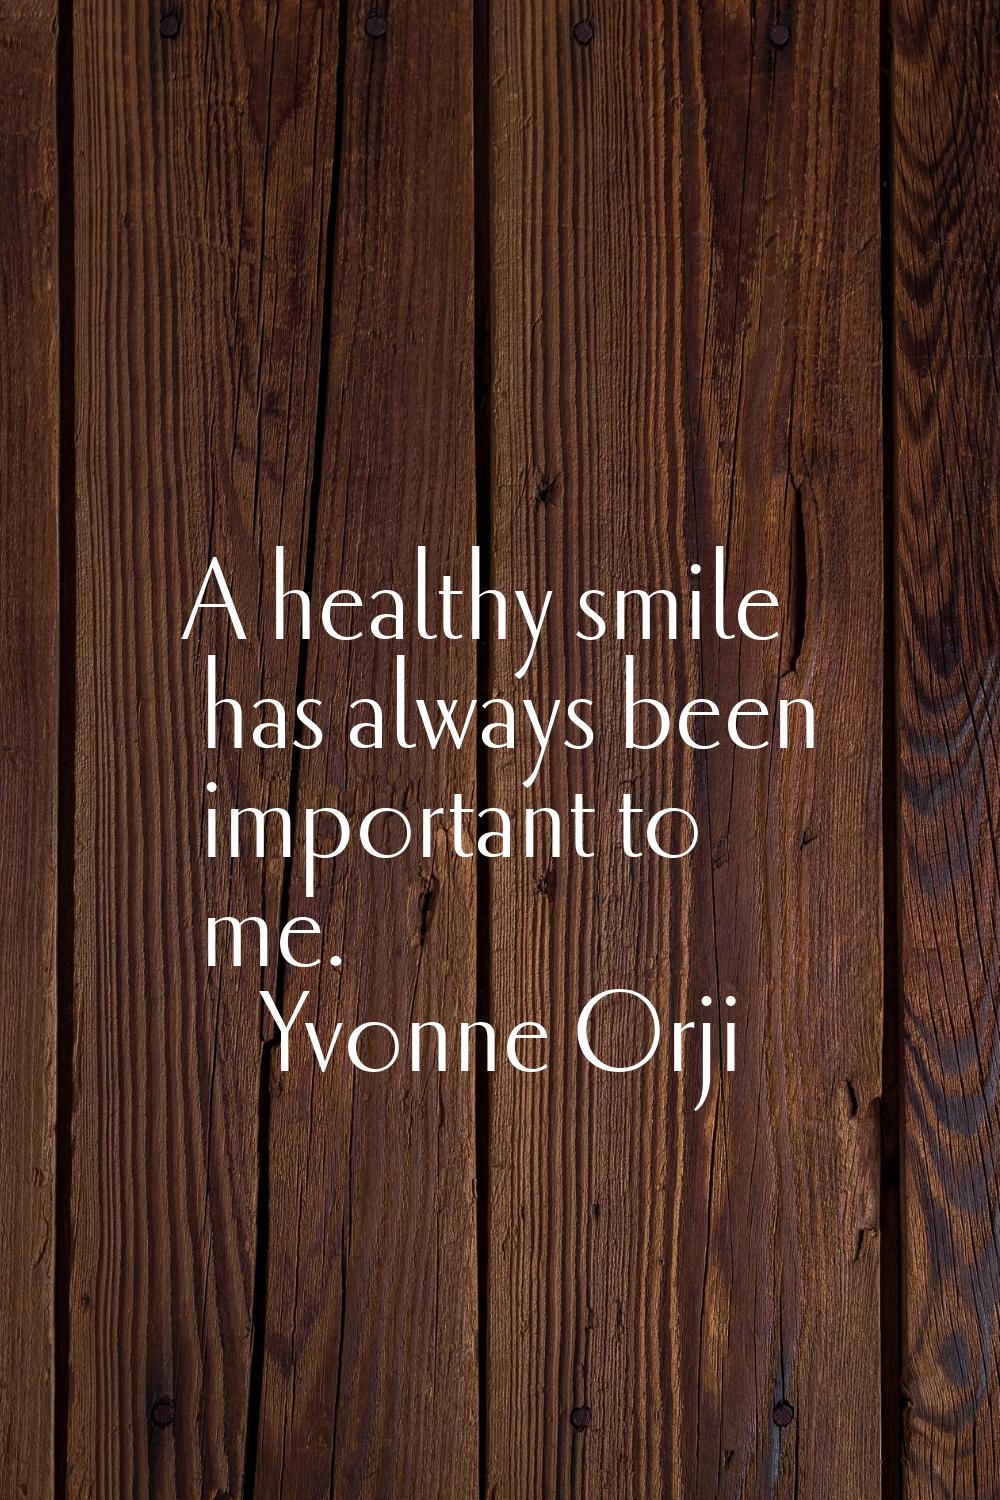 A healthy smile has always been important to me.